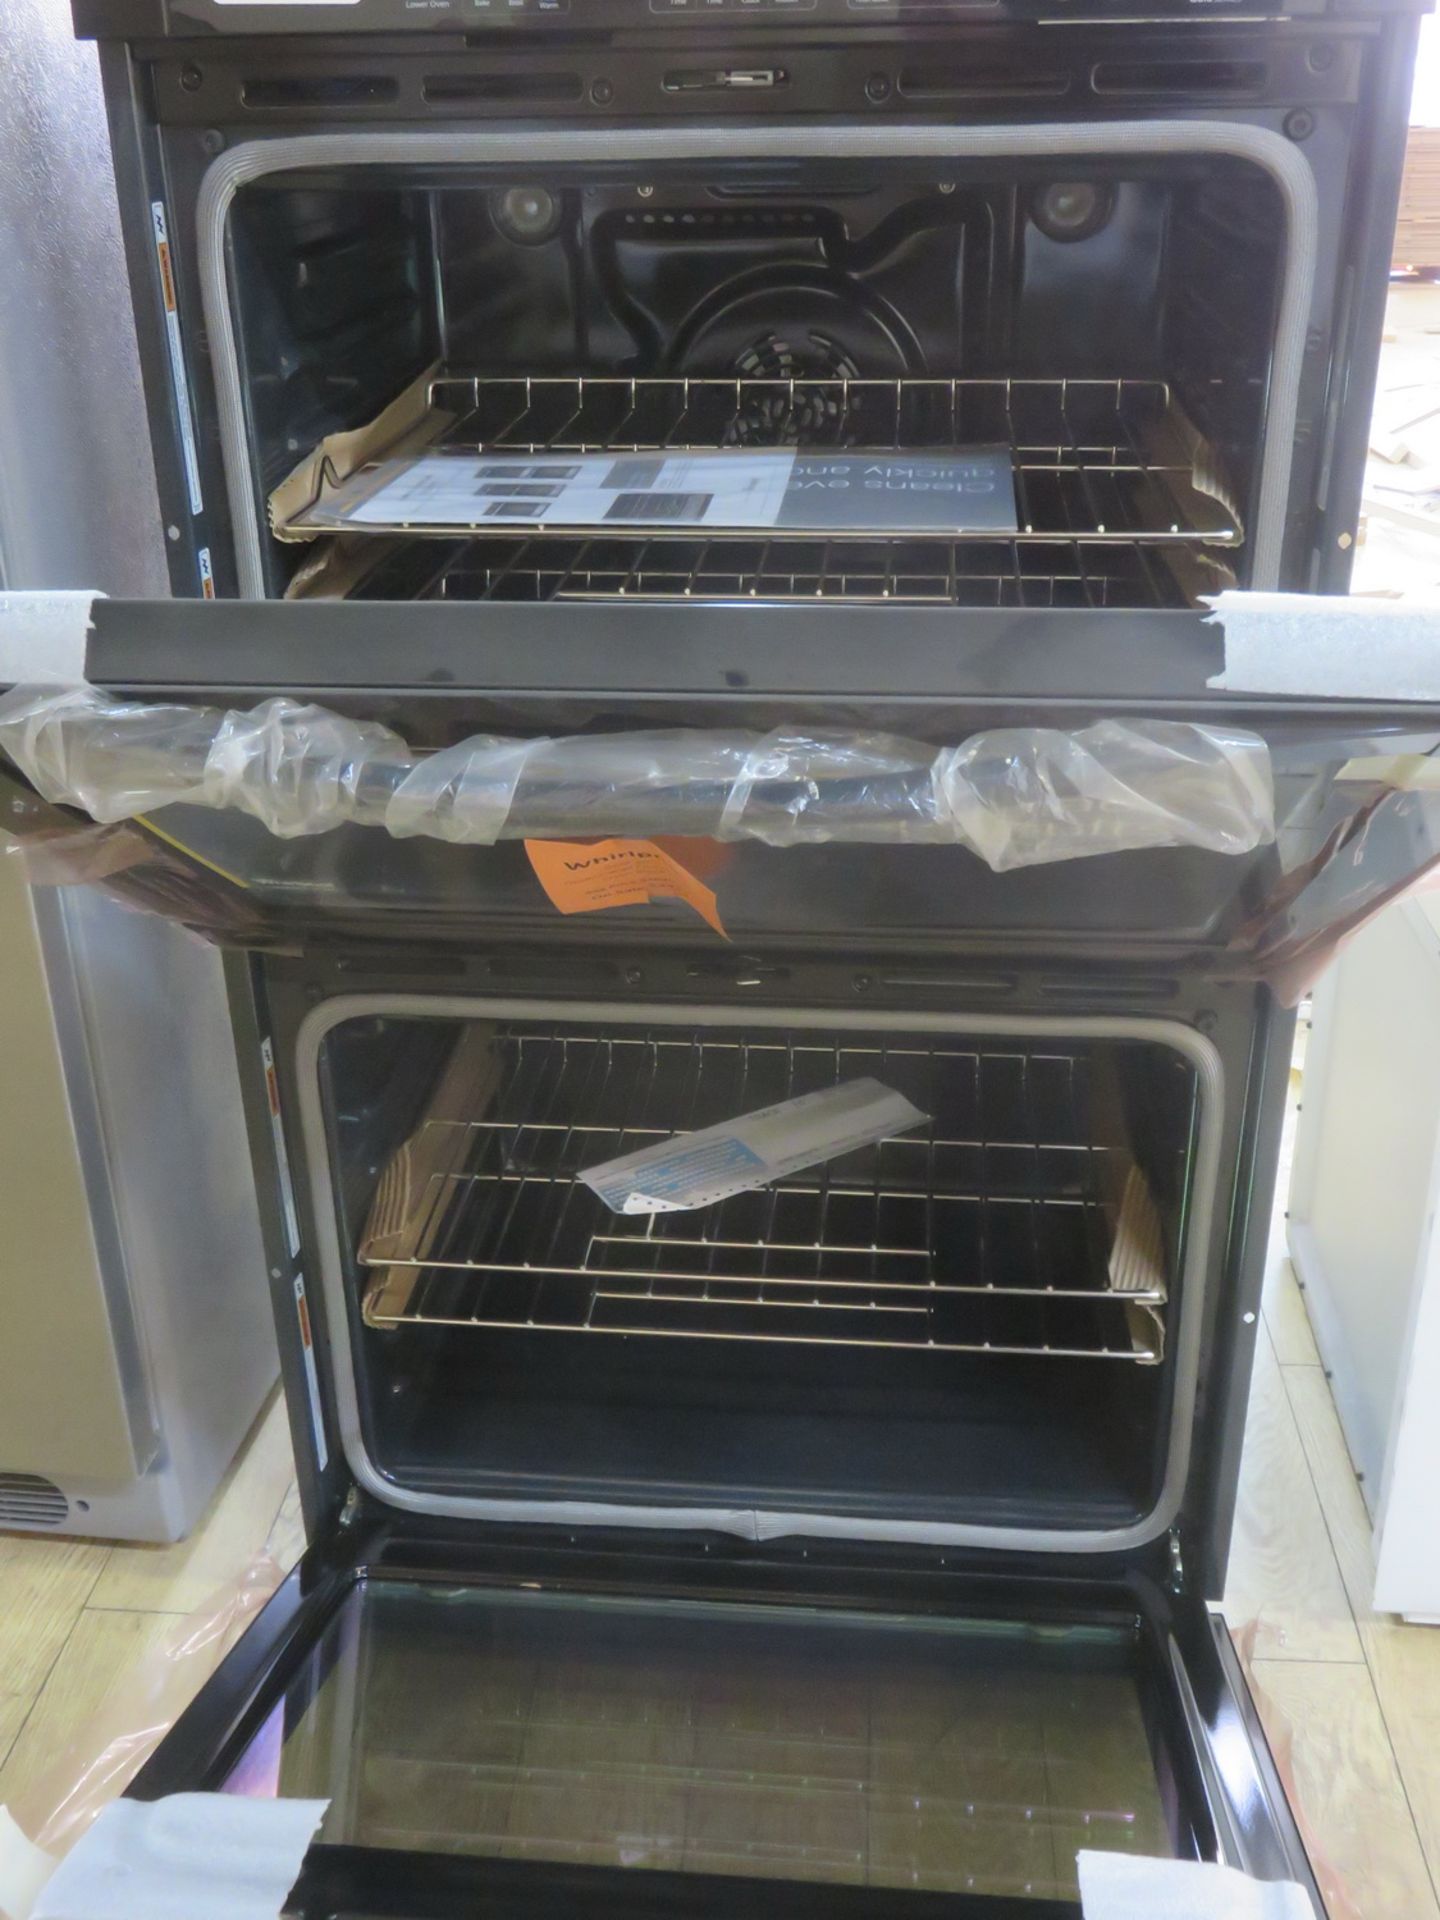 WHIRLPOOL GOLD SERIES W0D93ECOAB BLACK 30" DOUBLE ELECTRIC CONVECTION OVENS - Image 2 of 2